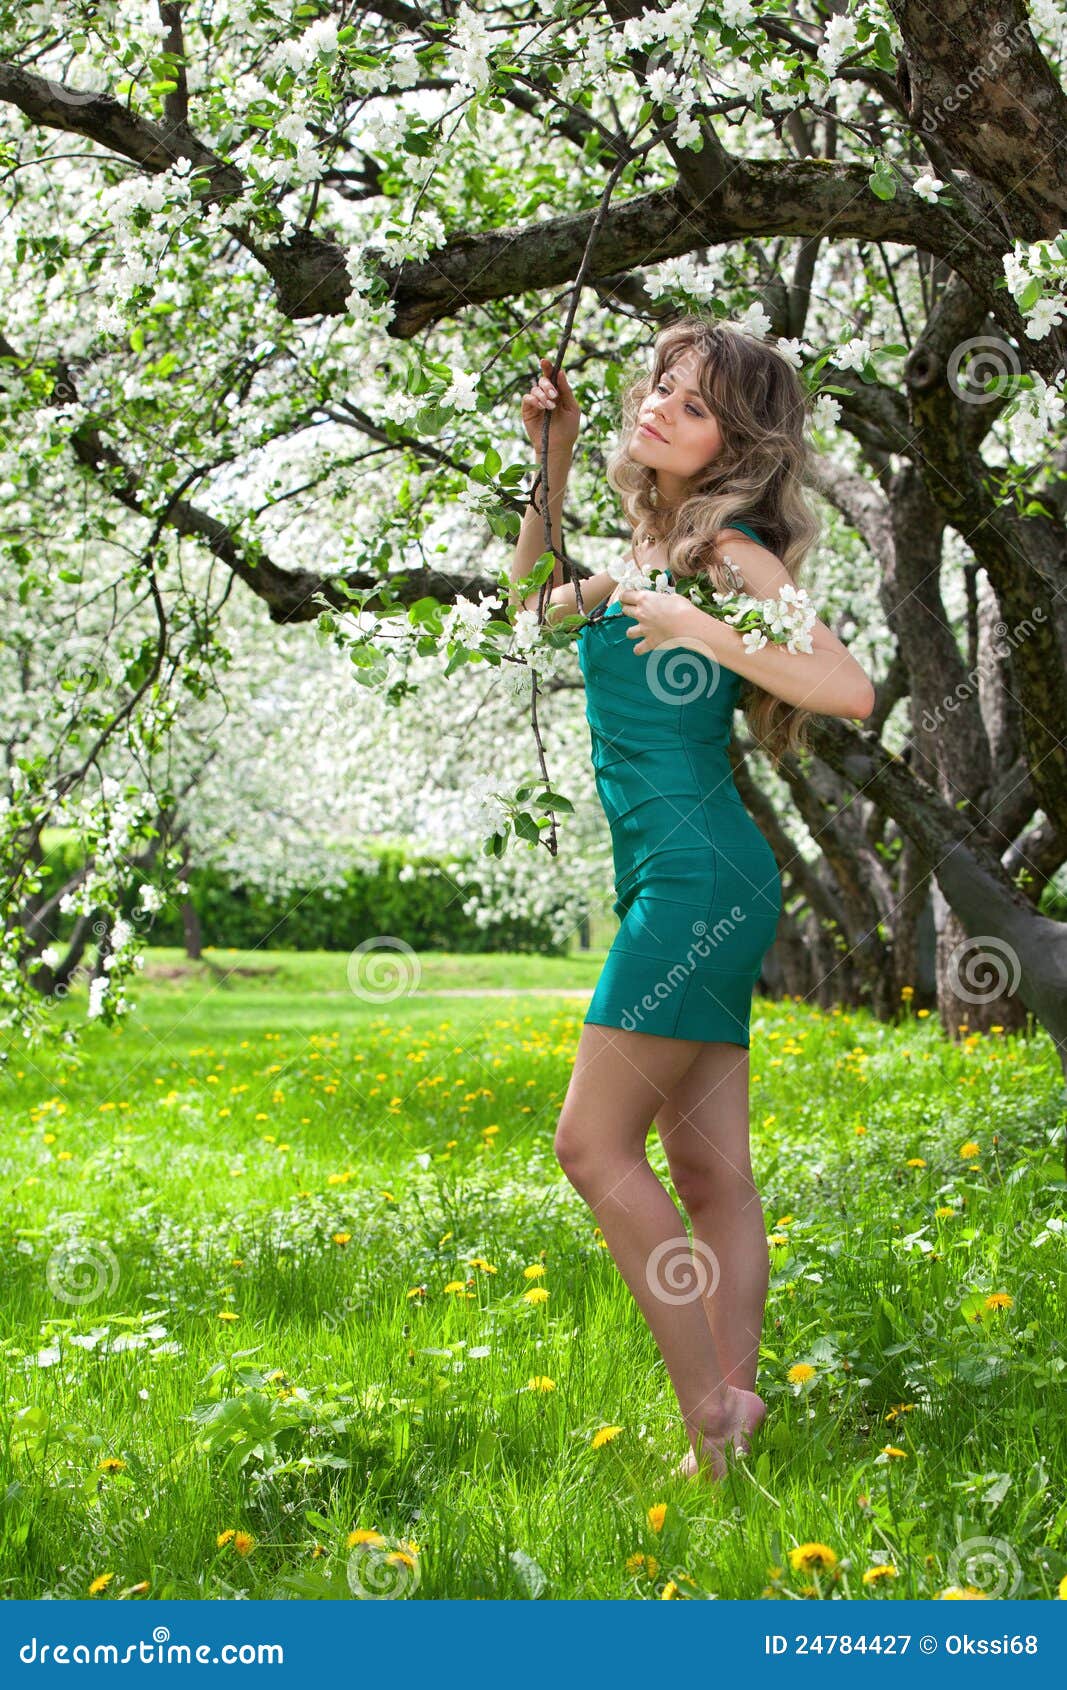 Girl In The Blossoming Garden Stock Image Image Of Woman Leaves